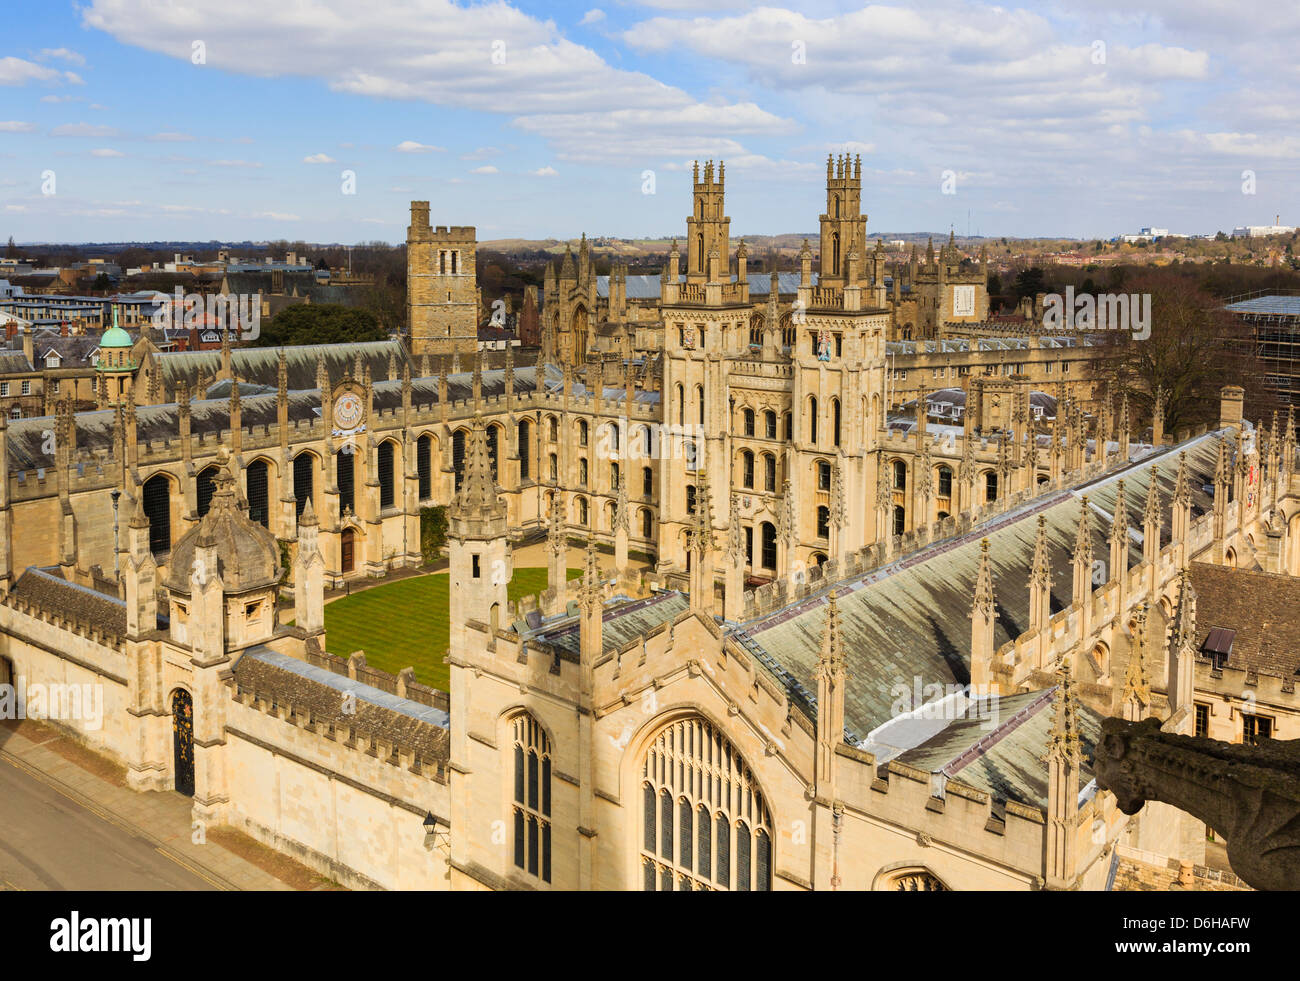 High view of All Souls College with Hawksmoor towers overlooking the quadrangle. Oxford, Oxfordshire, England, UK, Great Britain Stock Photo